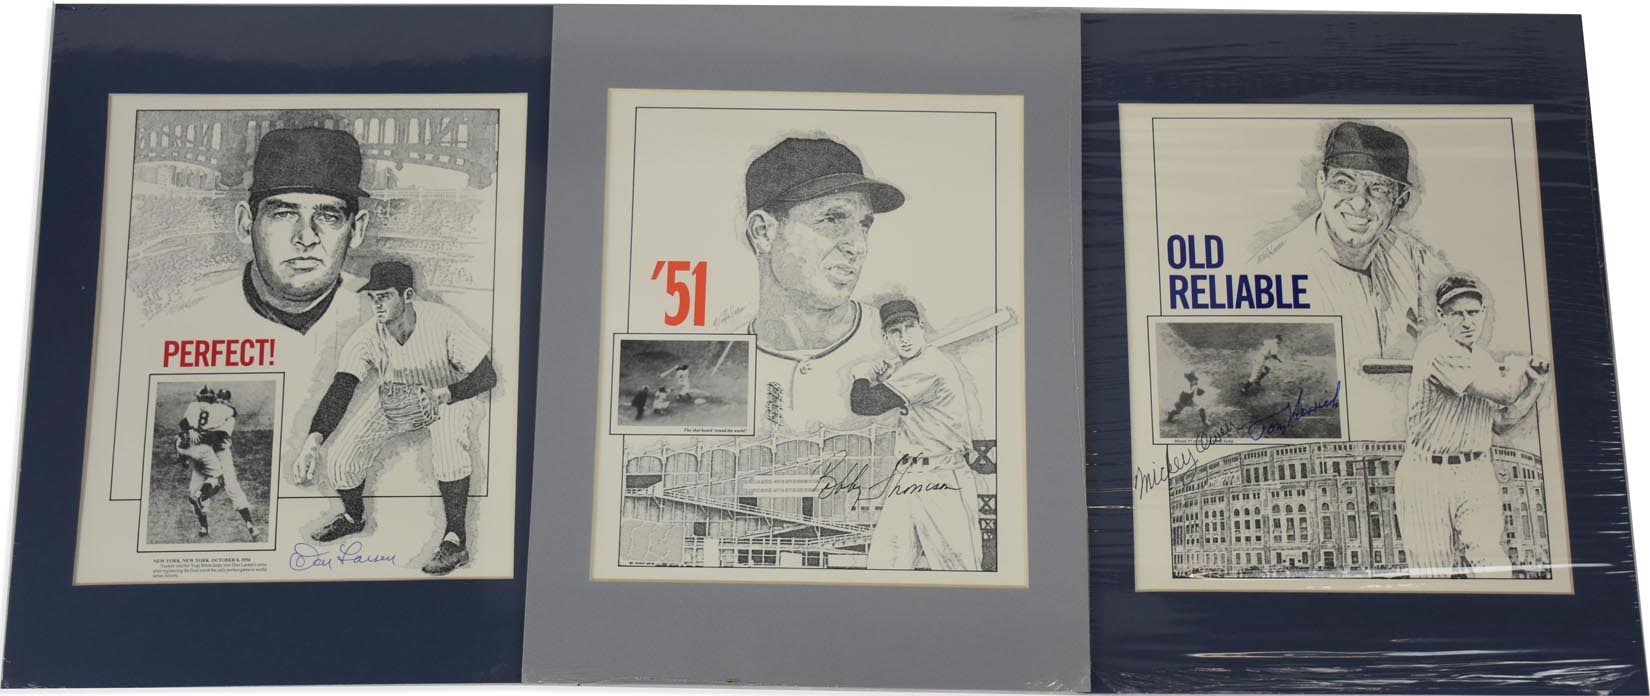 Baseball Autographs - Great Moments in Baseball Signed Prints (45)